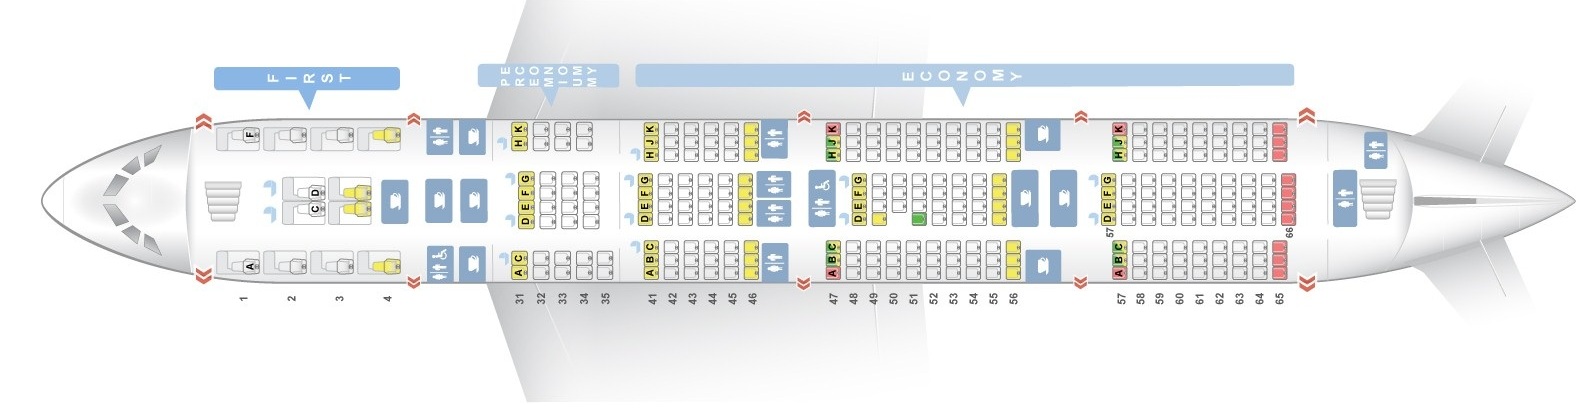 Seat map Airbus A380800 Singapore Airlines. Best seats in